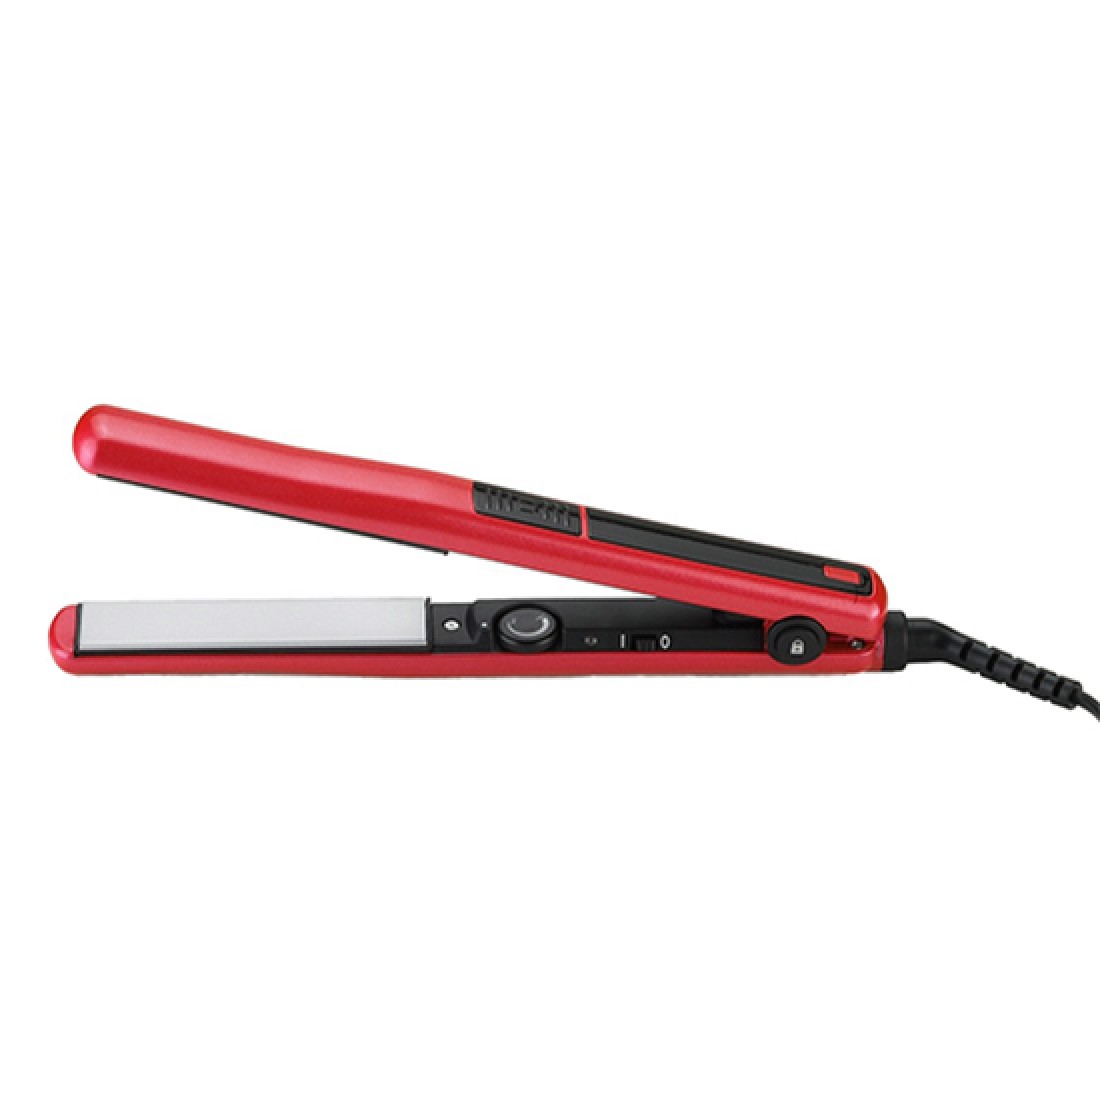 AlbiPro Professional Ceramic Hair Press Digital Red 2806 - 9600067 HAIR ELECTRICALS